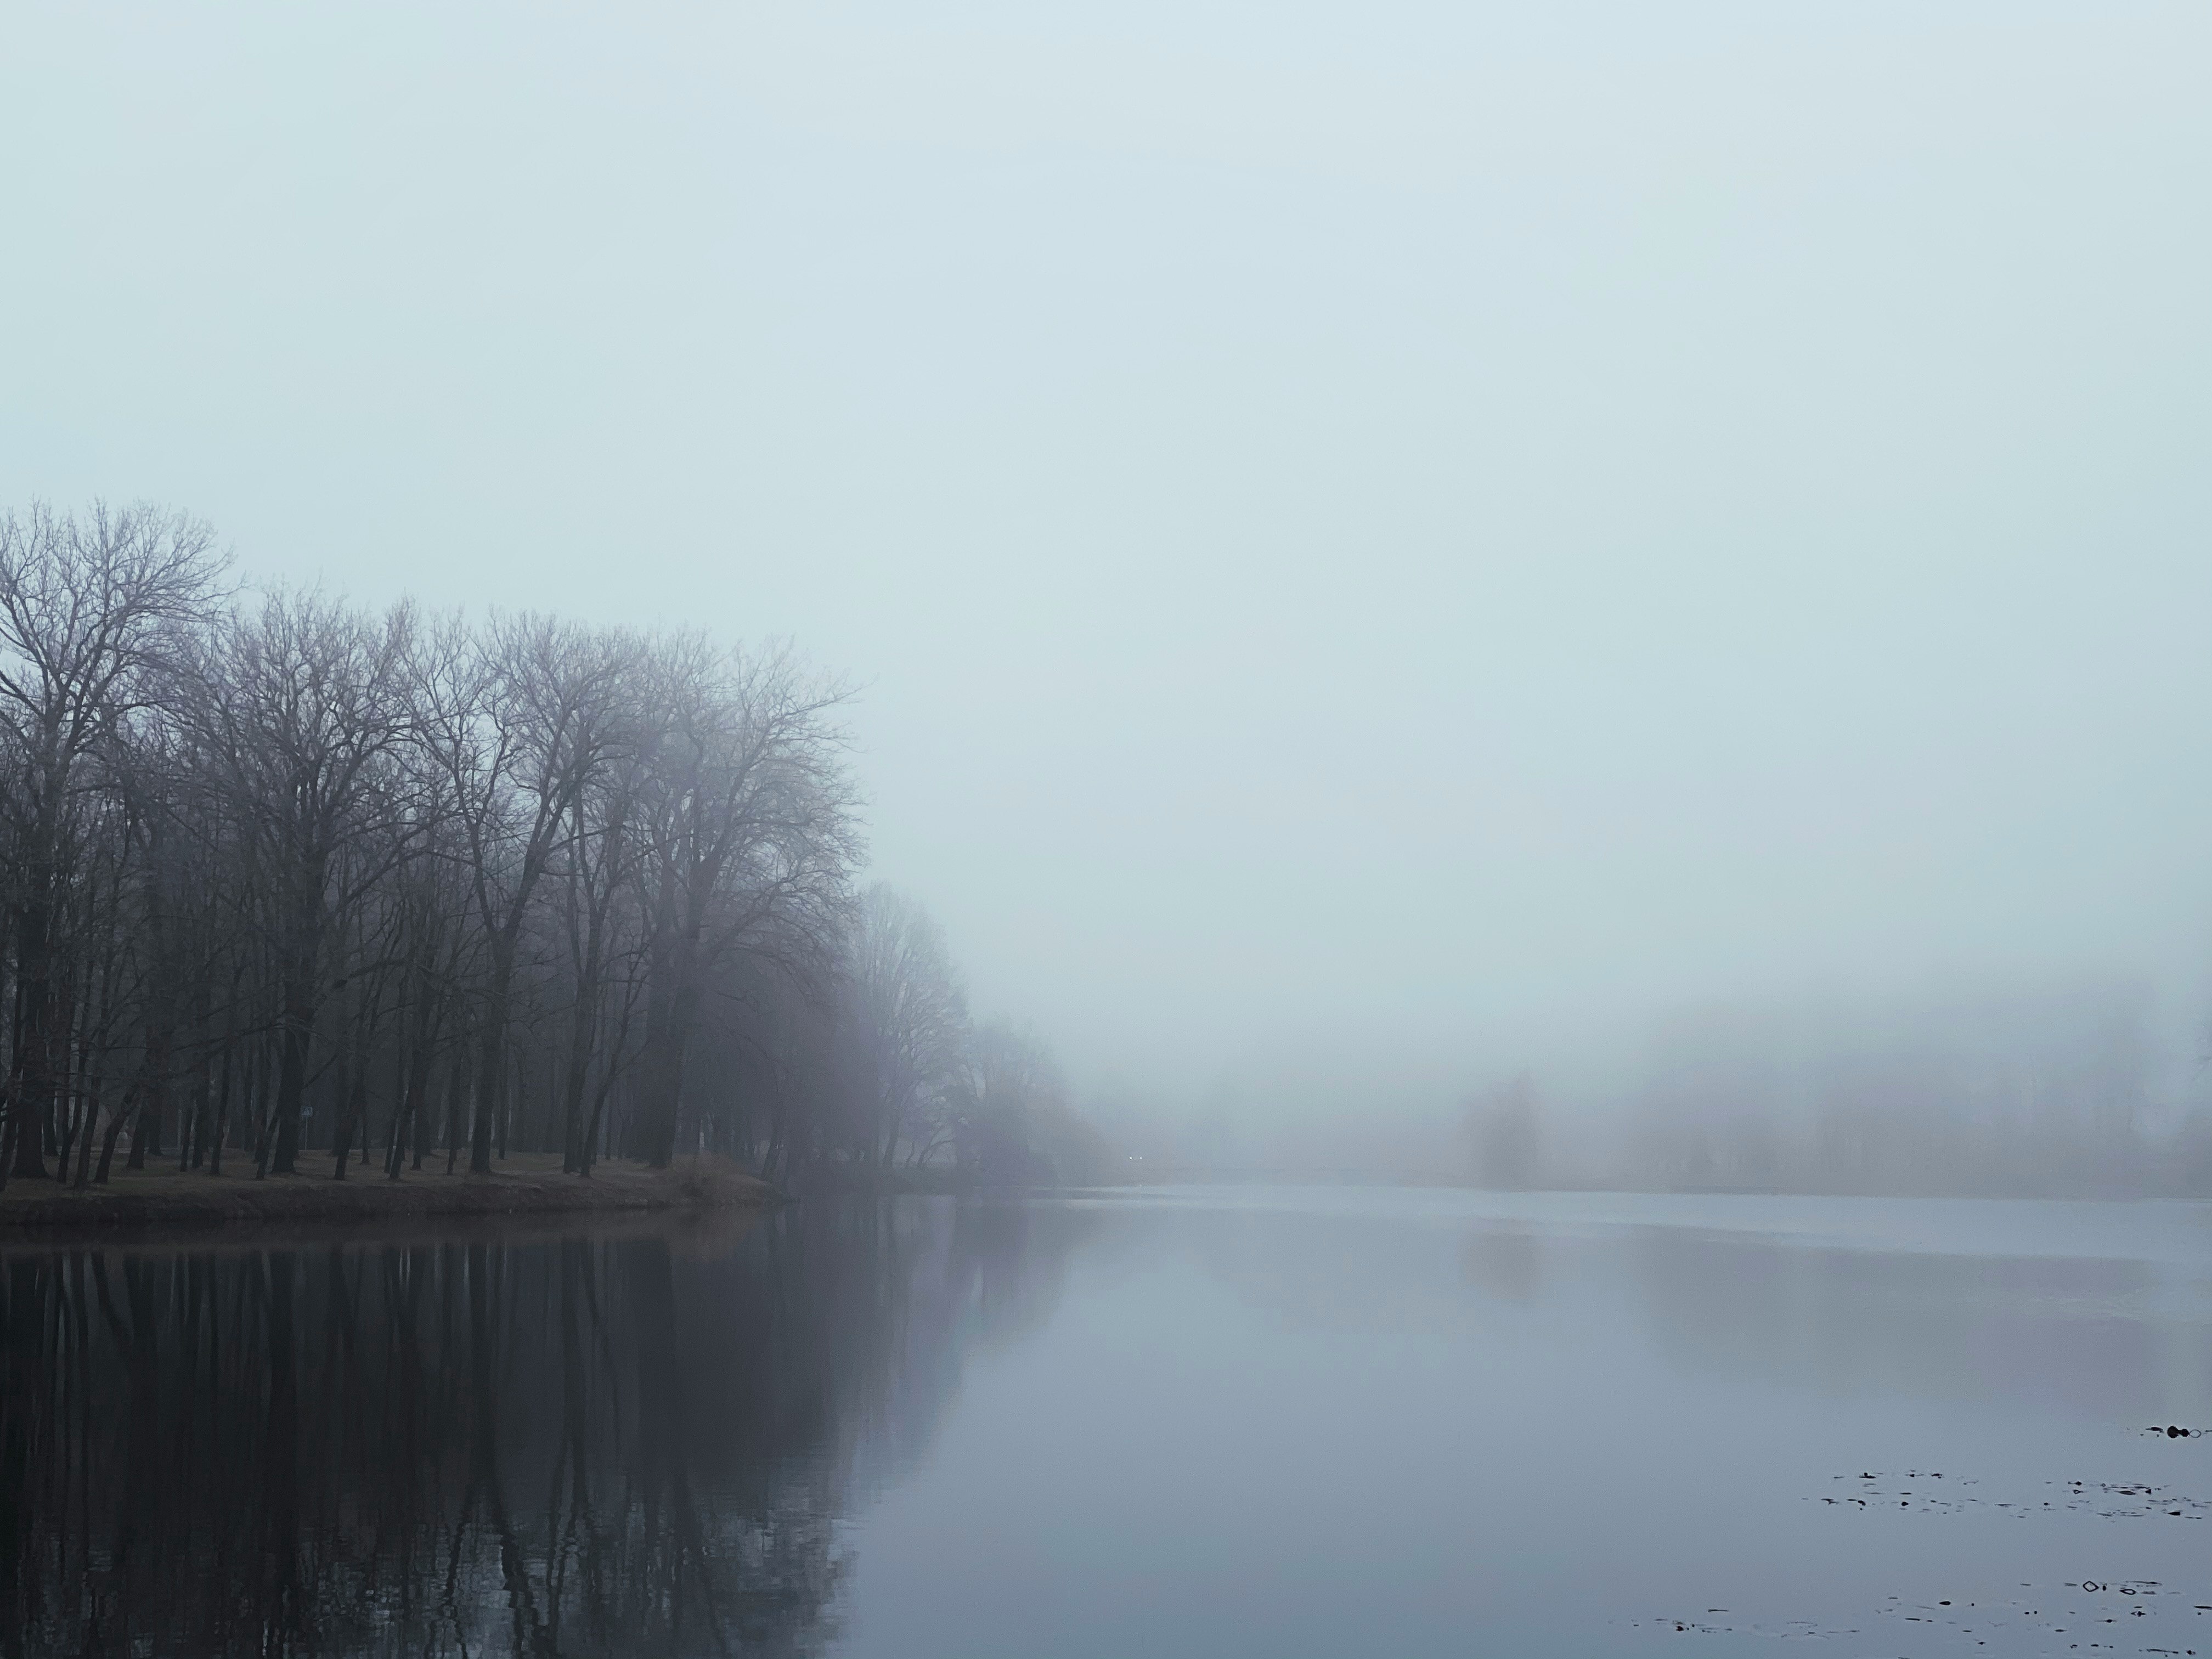 body of water near trees during foggy weather